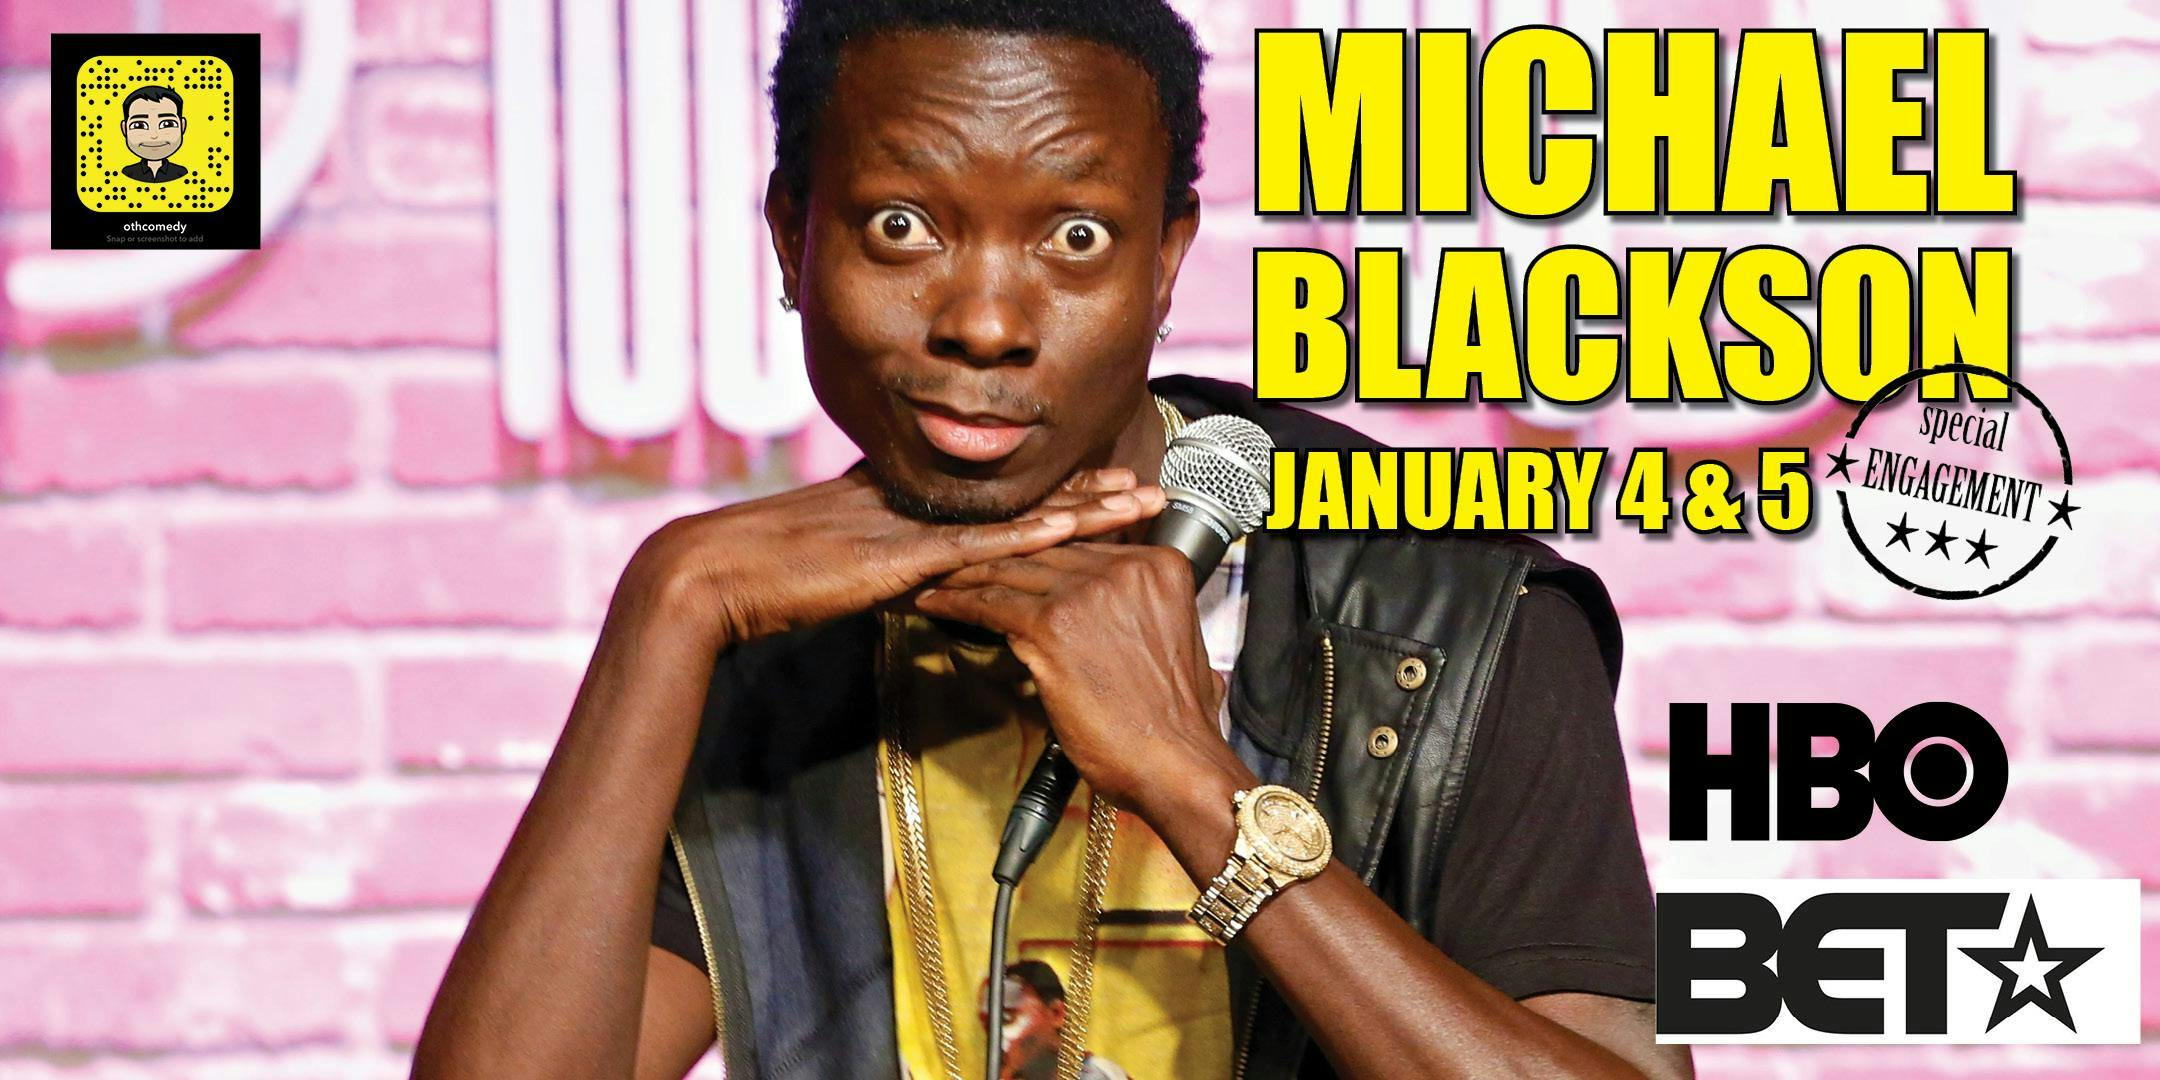 Michael Blackson live at Off the hook Comedy Club in Naples, FL